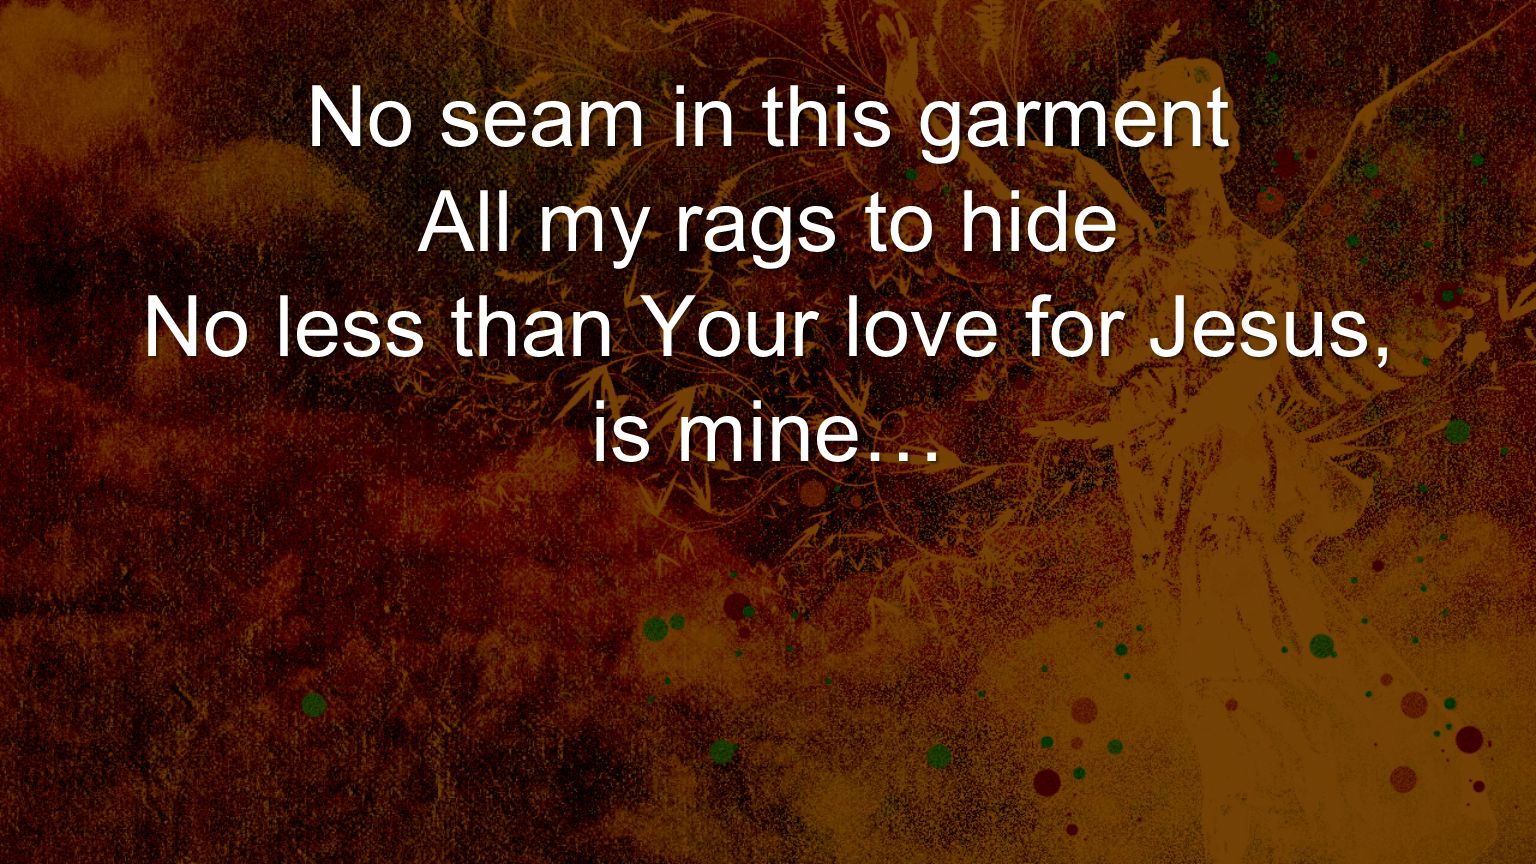 No seam in this garment All my rags to hide No less than Your love for Jesus, is mine…